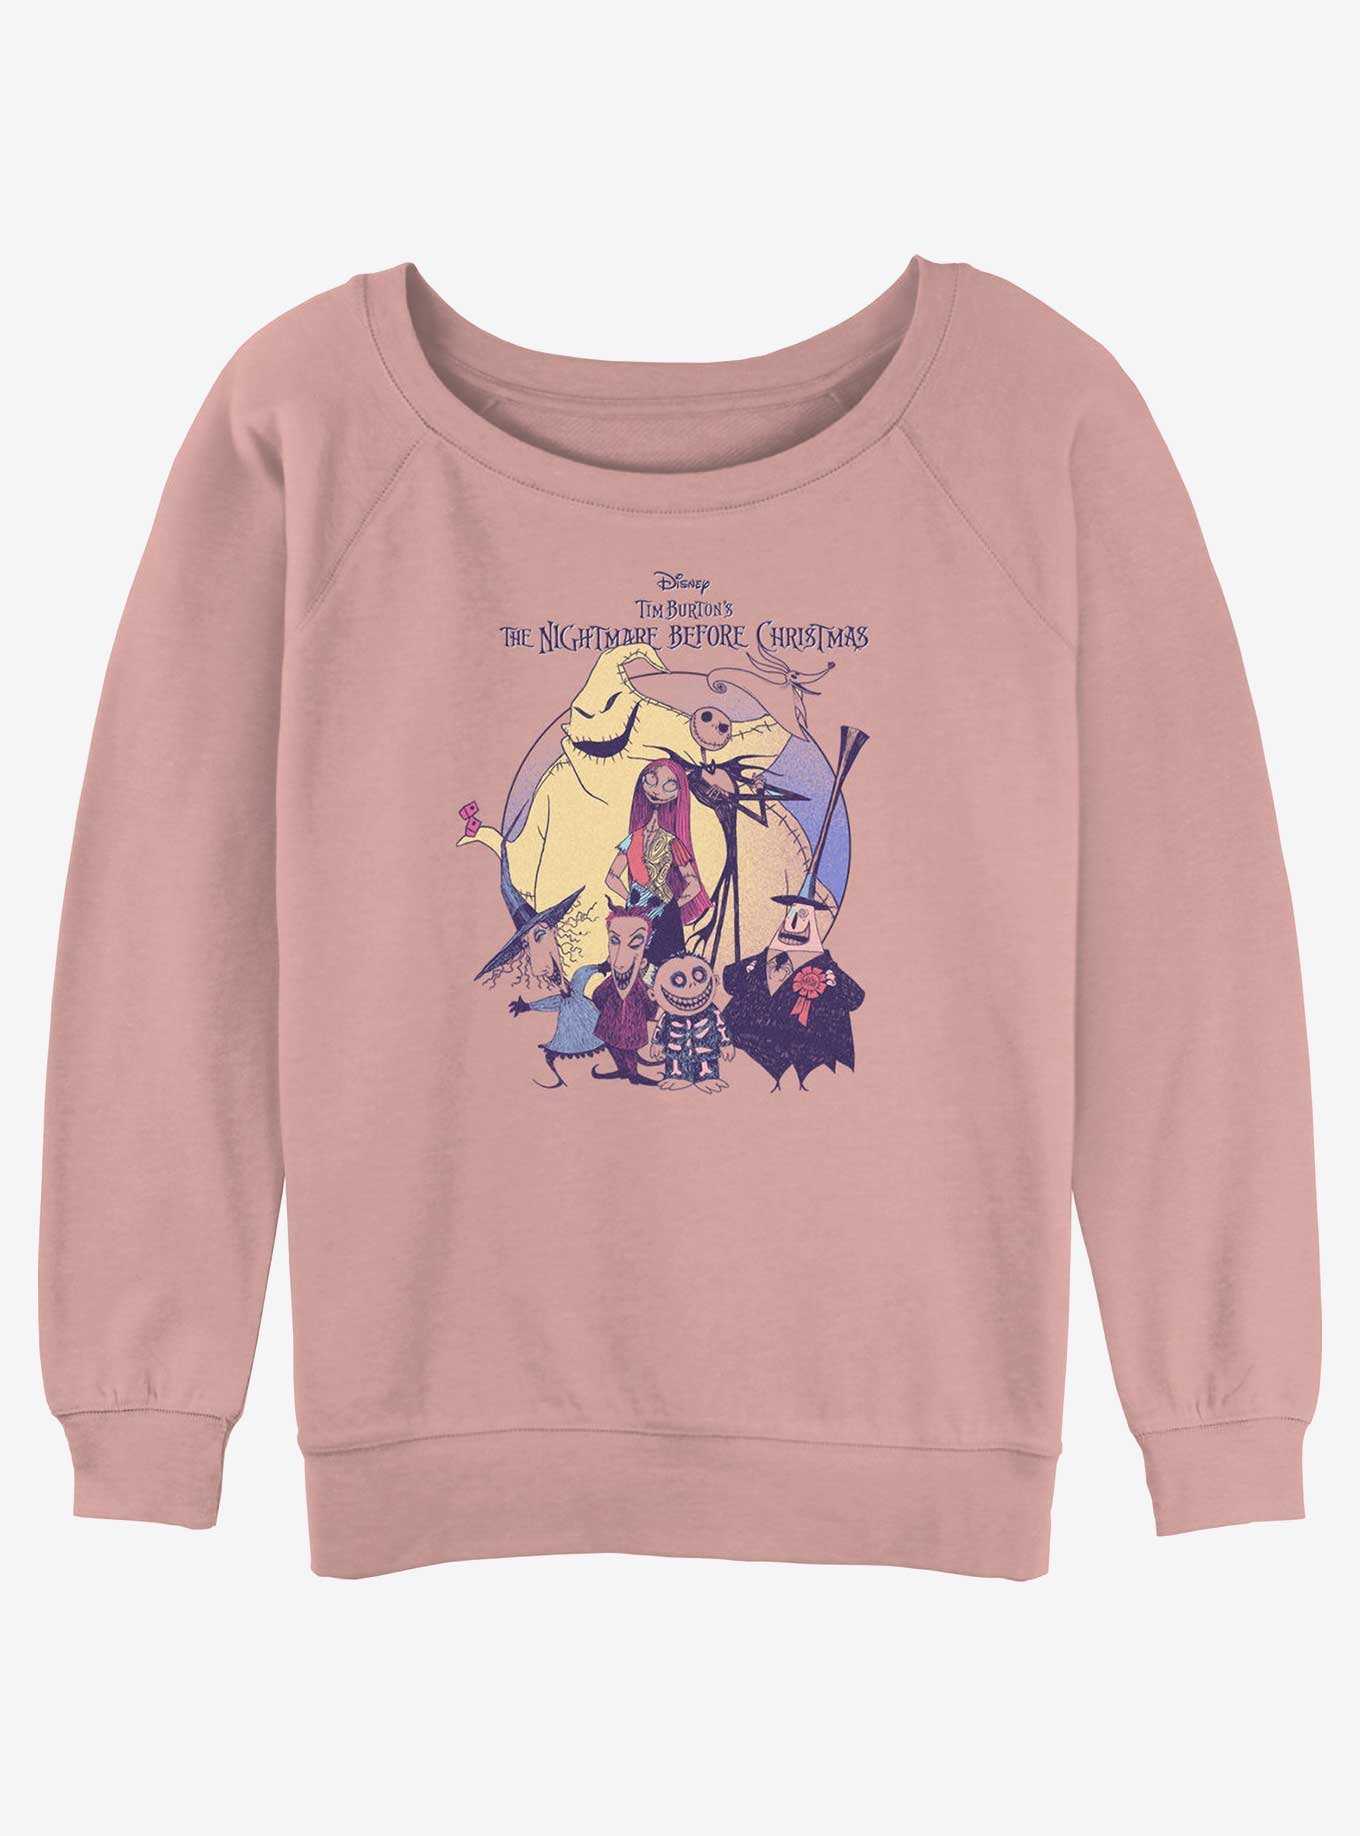 Disney The Nightmare Before Christmas Scary Squad Womens Slouchy Sweatshirt, , hi-res